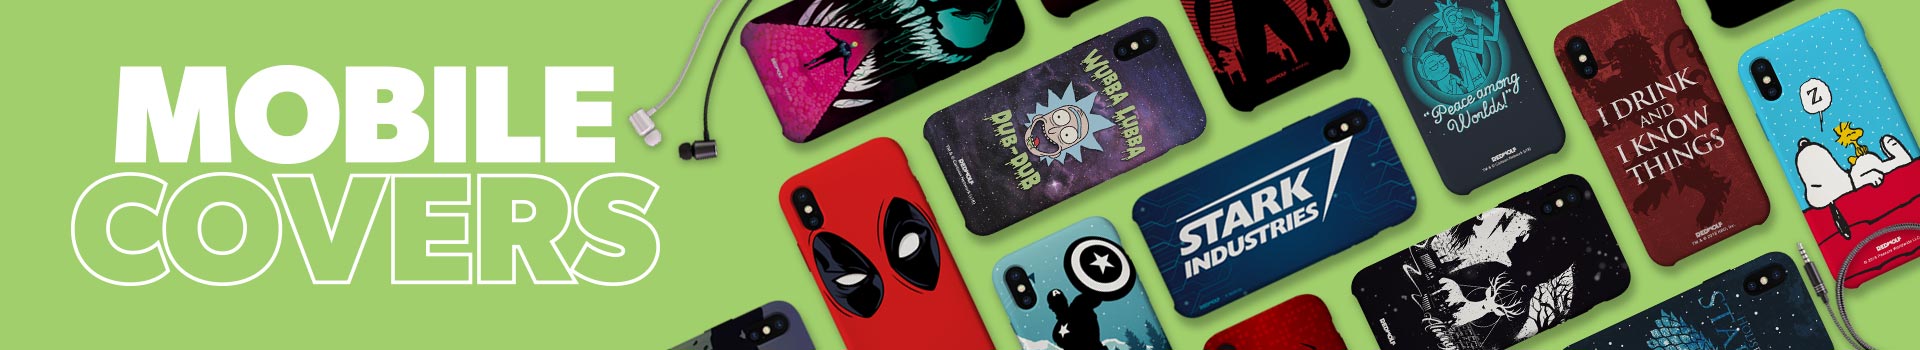 Redwolf Mobile Covers